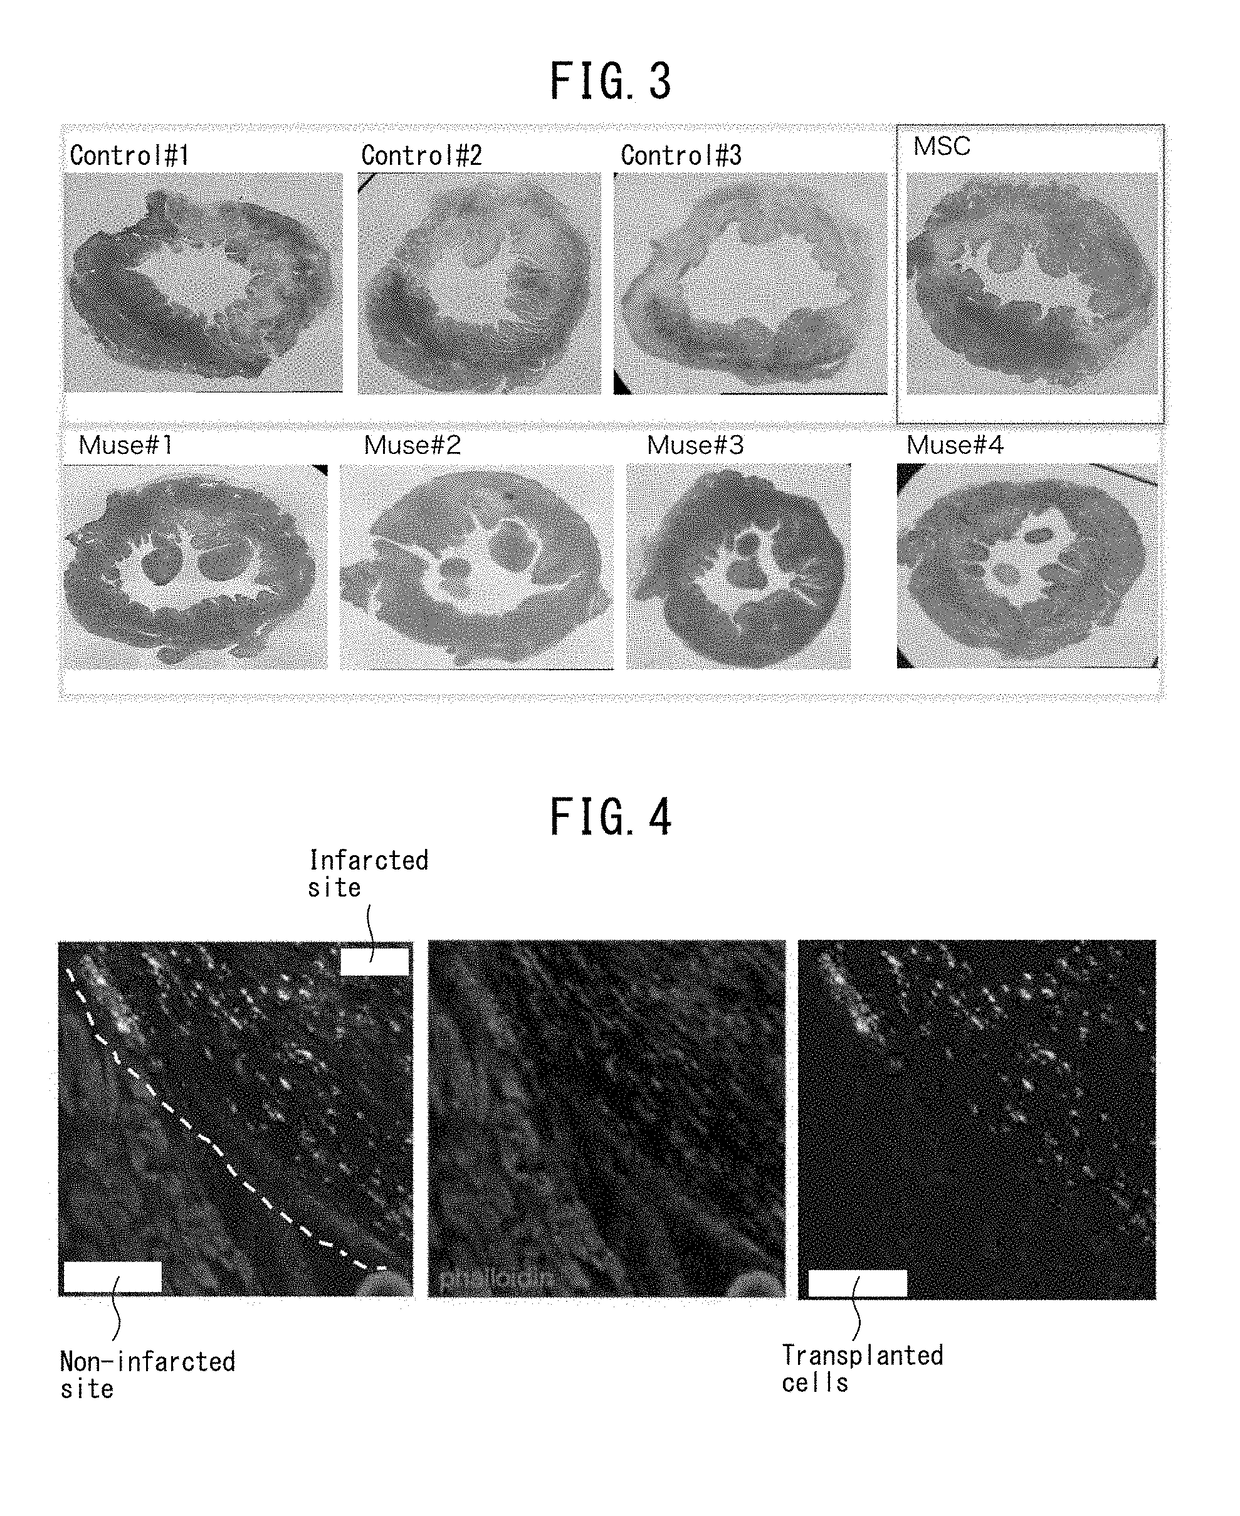 Pluripotent stem cell that induces repair and regeneration after myocardial infarction